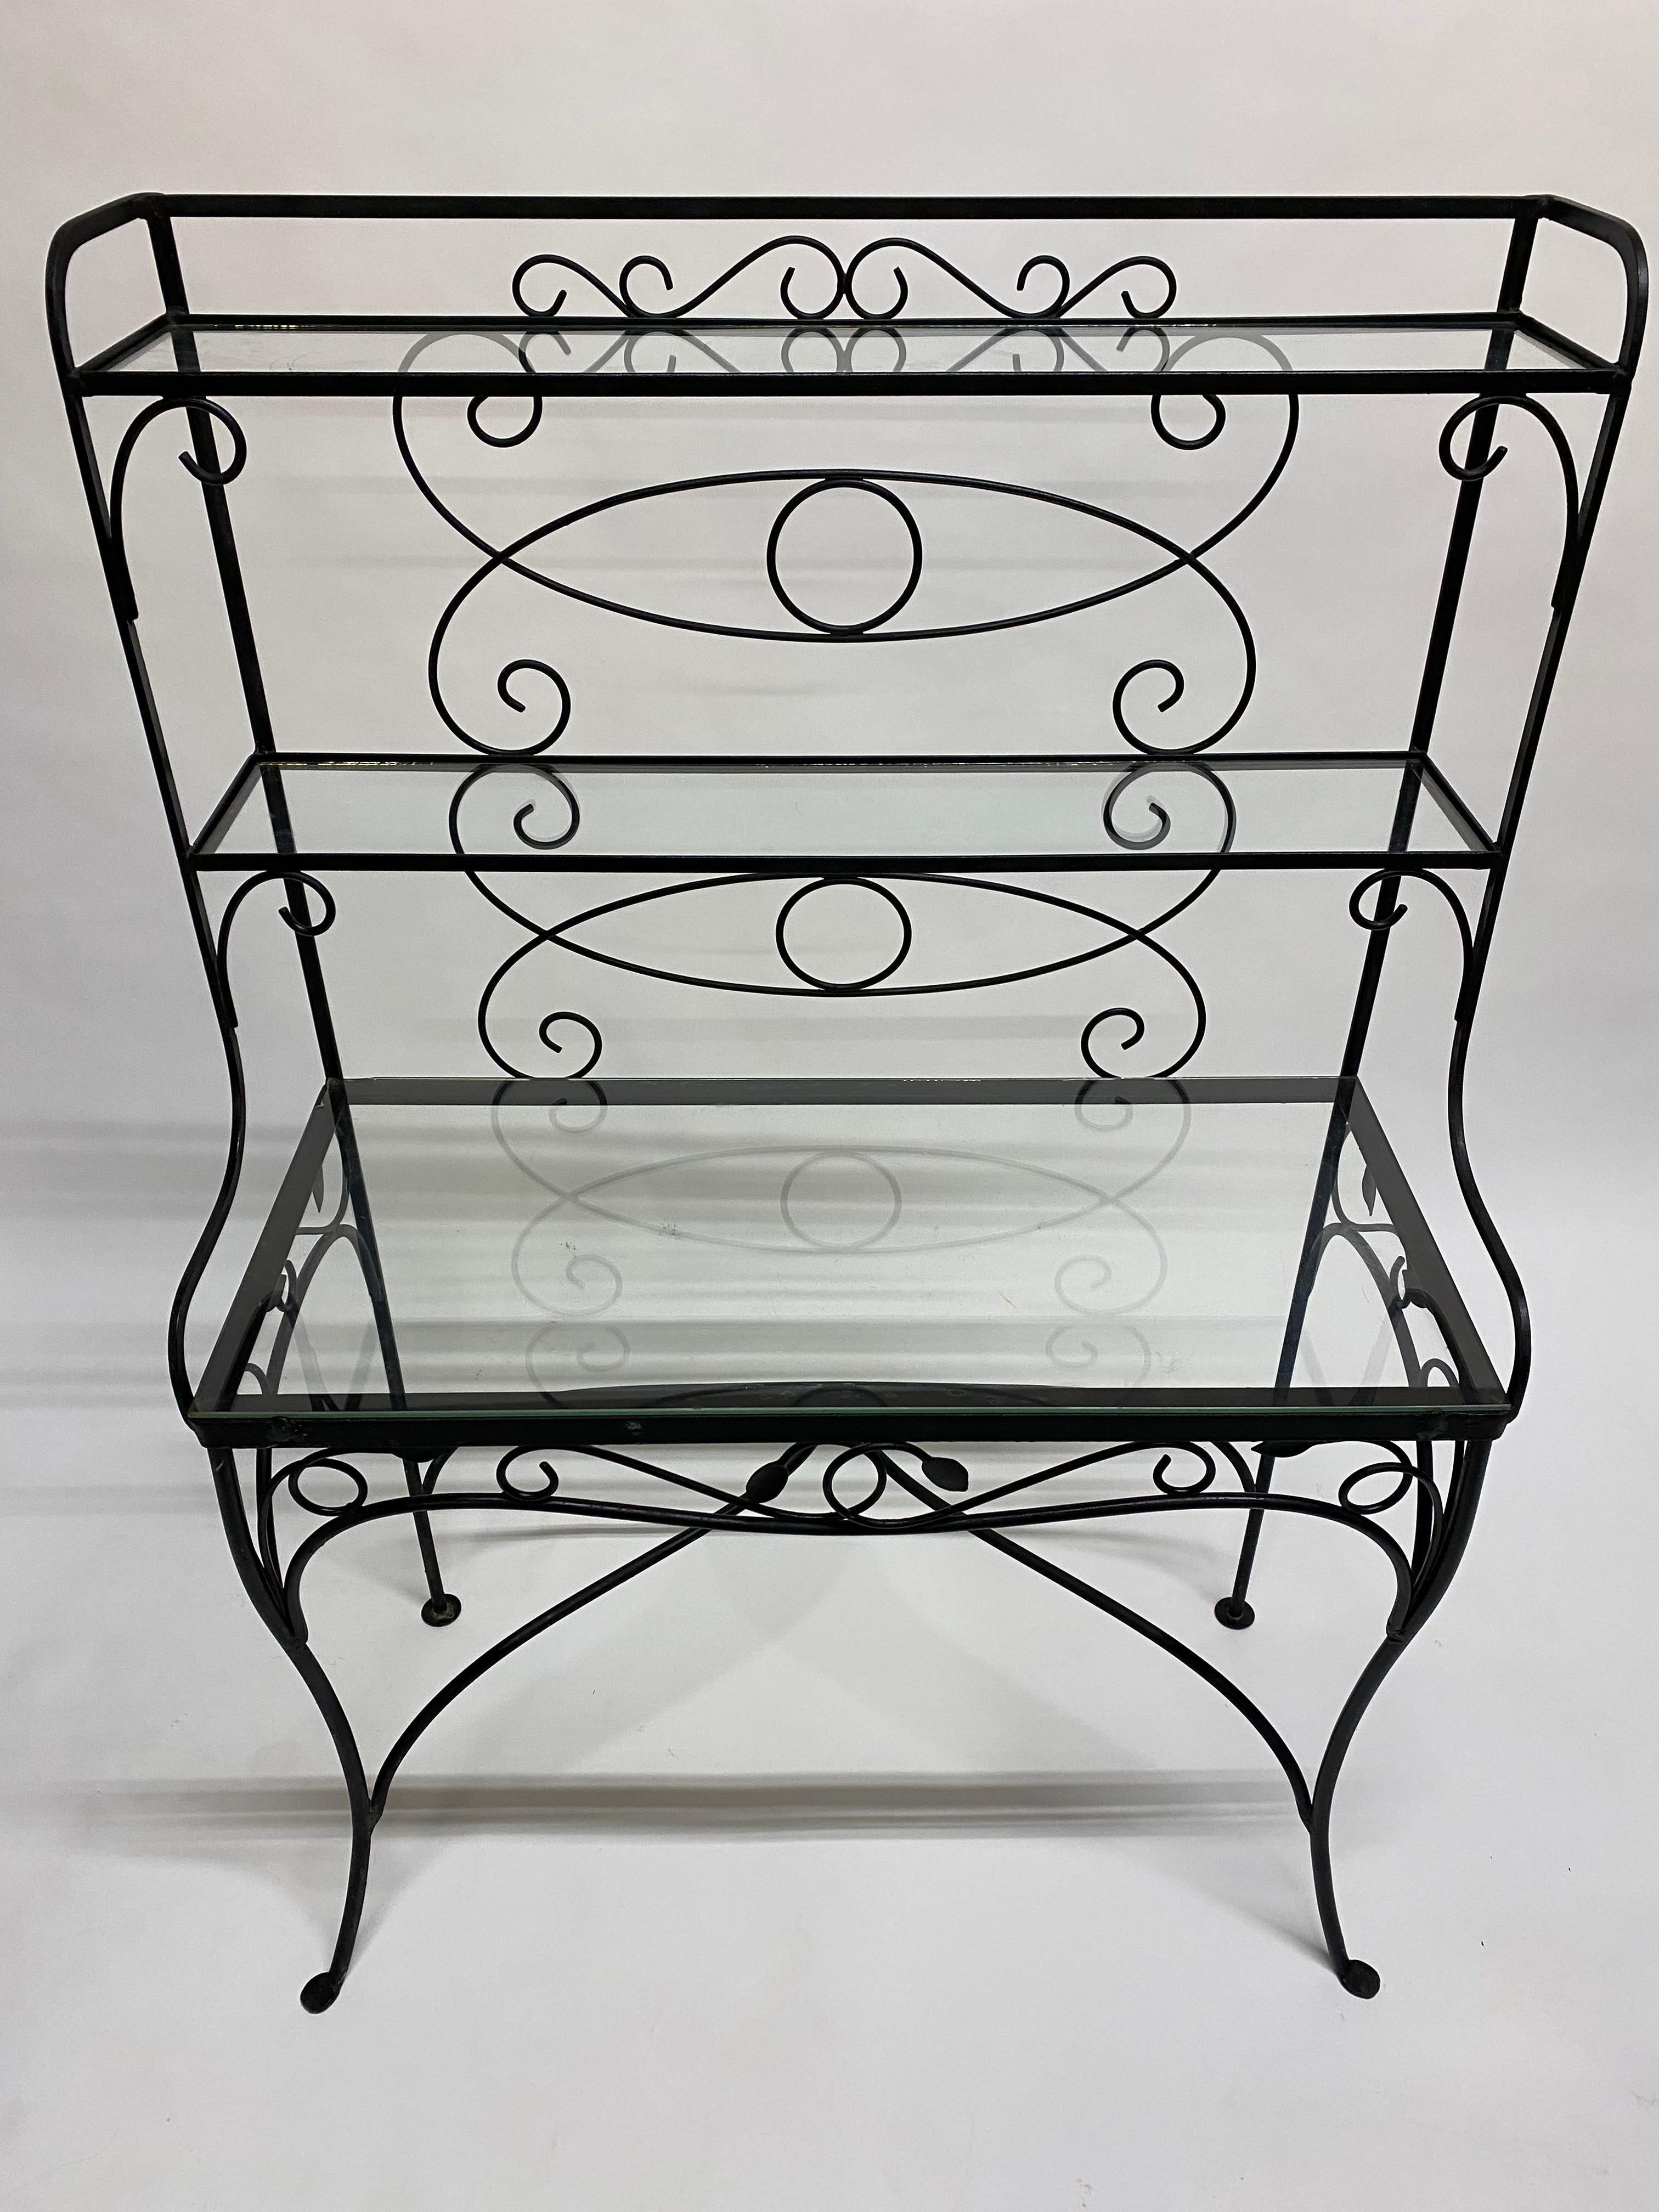 Mid-20 Century designed scroll and leaf iron and glass step back etagere. Three glass shelves and can be used either indoors or out. Fine delicately scrolled iron work with leaf accents in the manner of Woodard or Slaterini outdoor